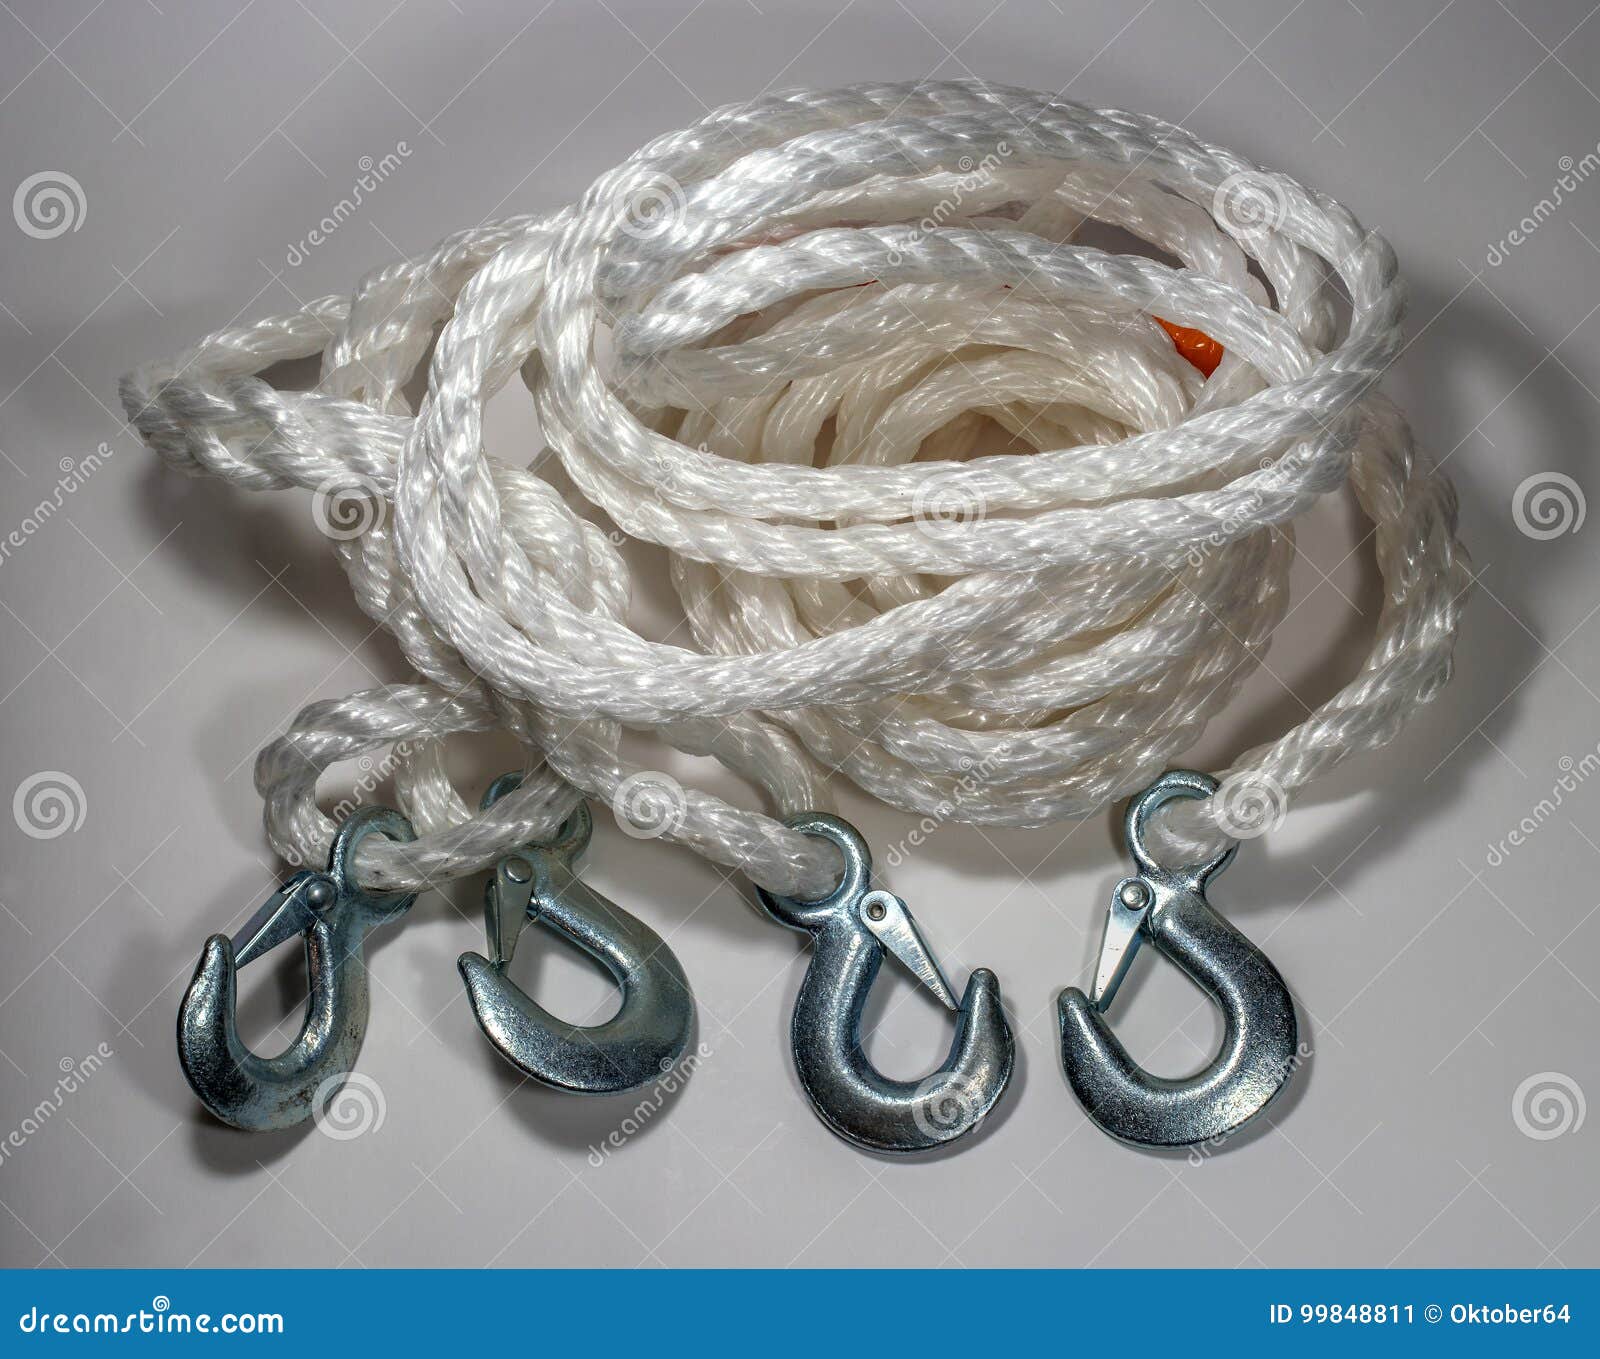 A Tow Rope with Hooks on a Light Background. Stock Image - Image of metal,  durable: 99848811